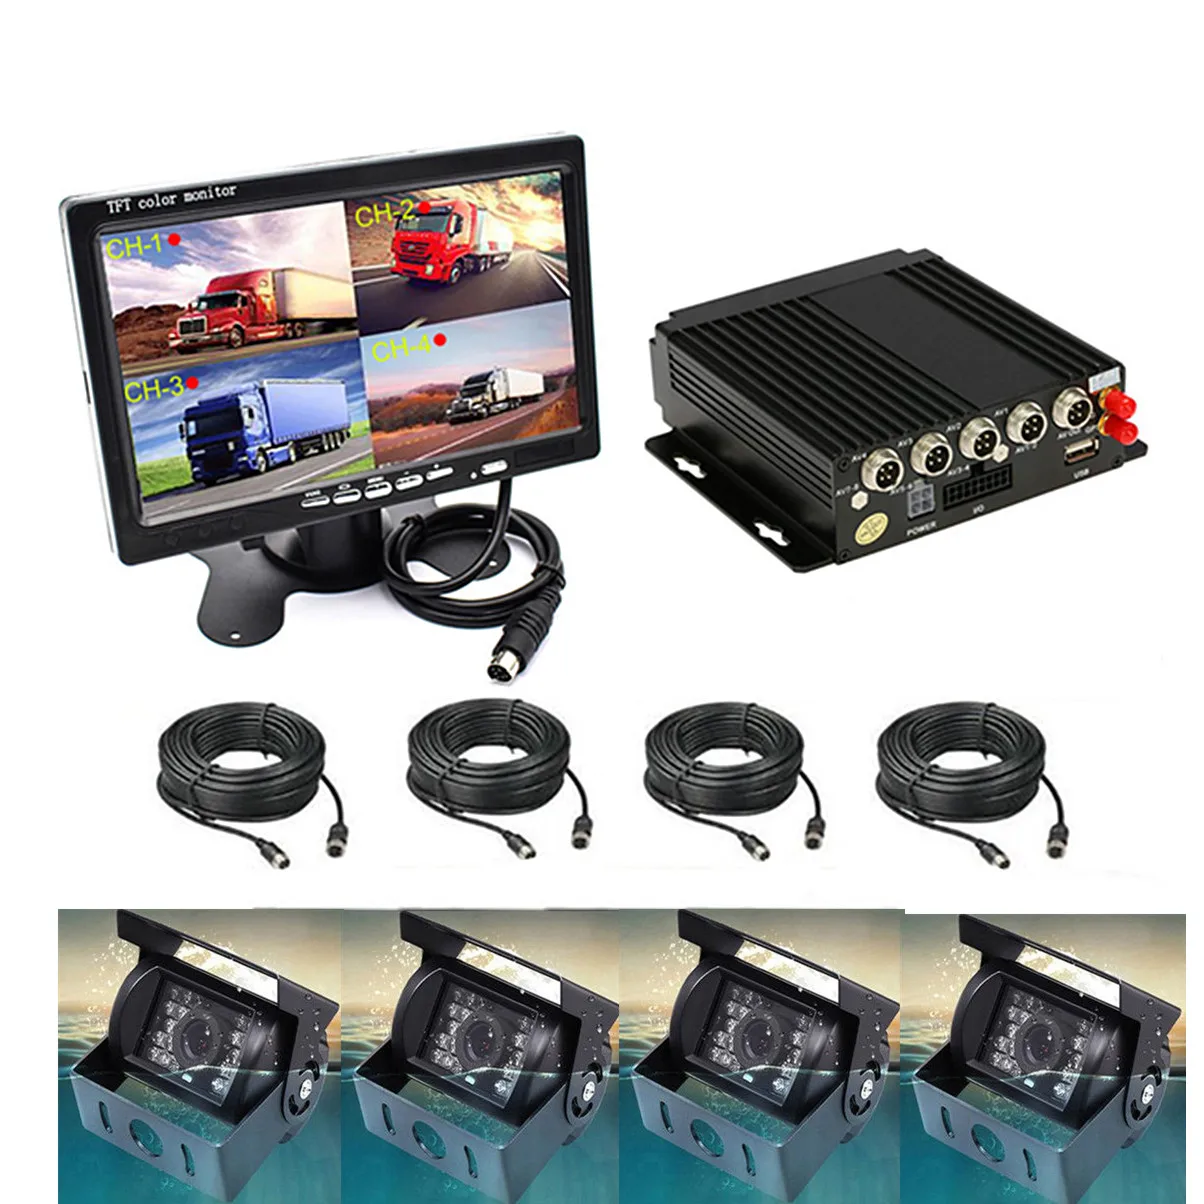 

720P 4CH H.264 Car Vehicle DVR AHD SD 4G Wireless GPS Realtime Video Recorder Box+7" HD 4Pcs CCD 720P Front Rear Side Camera